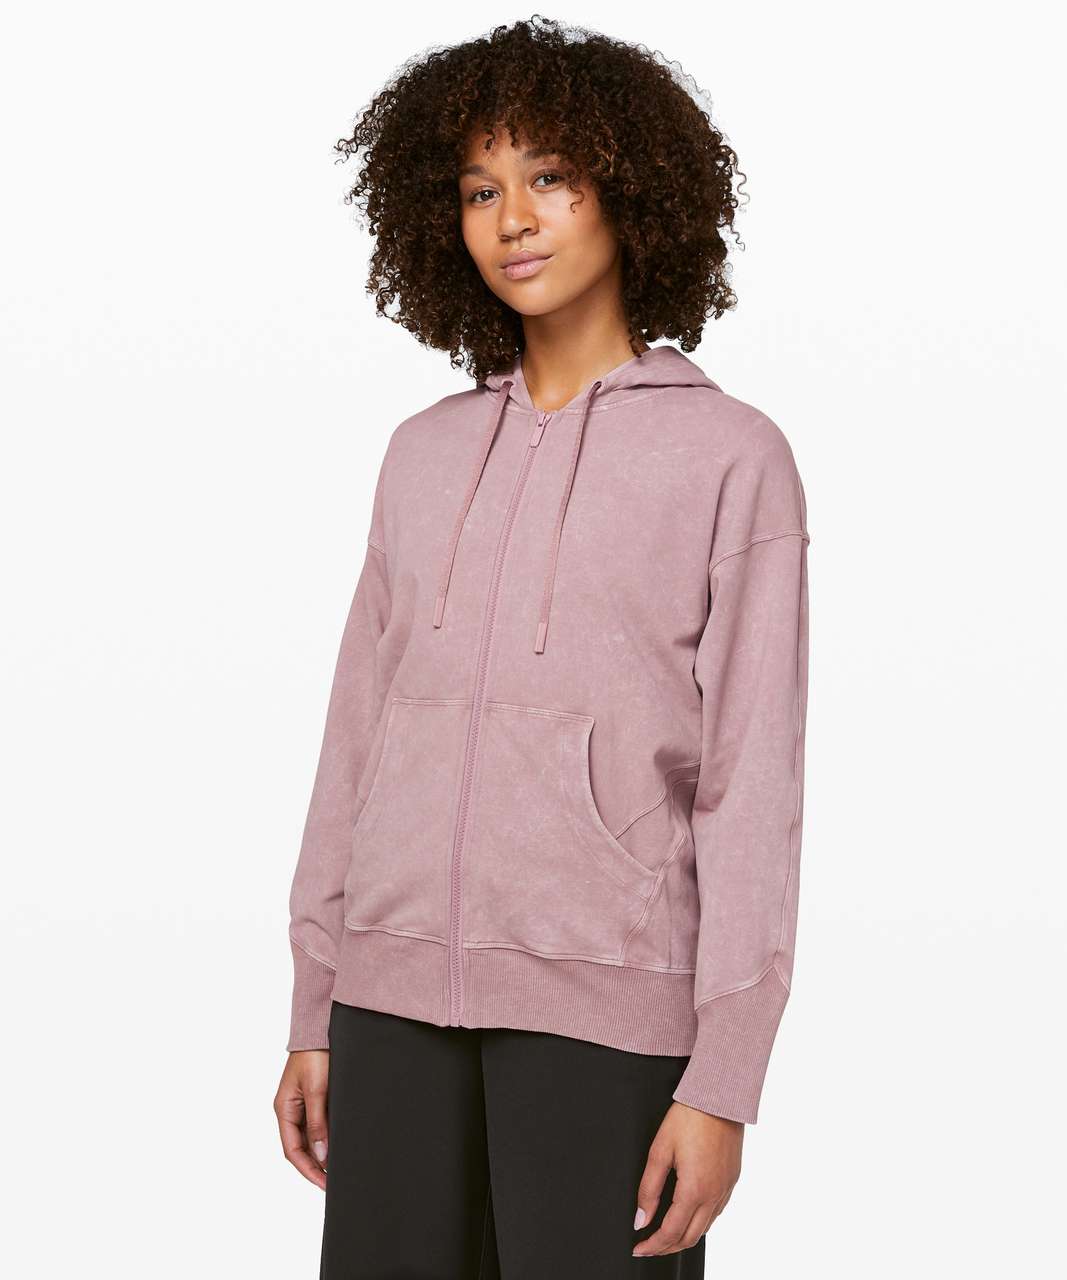 Lululemon Ready to Roll Hoodie - Washed Vintage Mauve